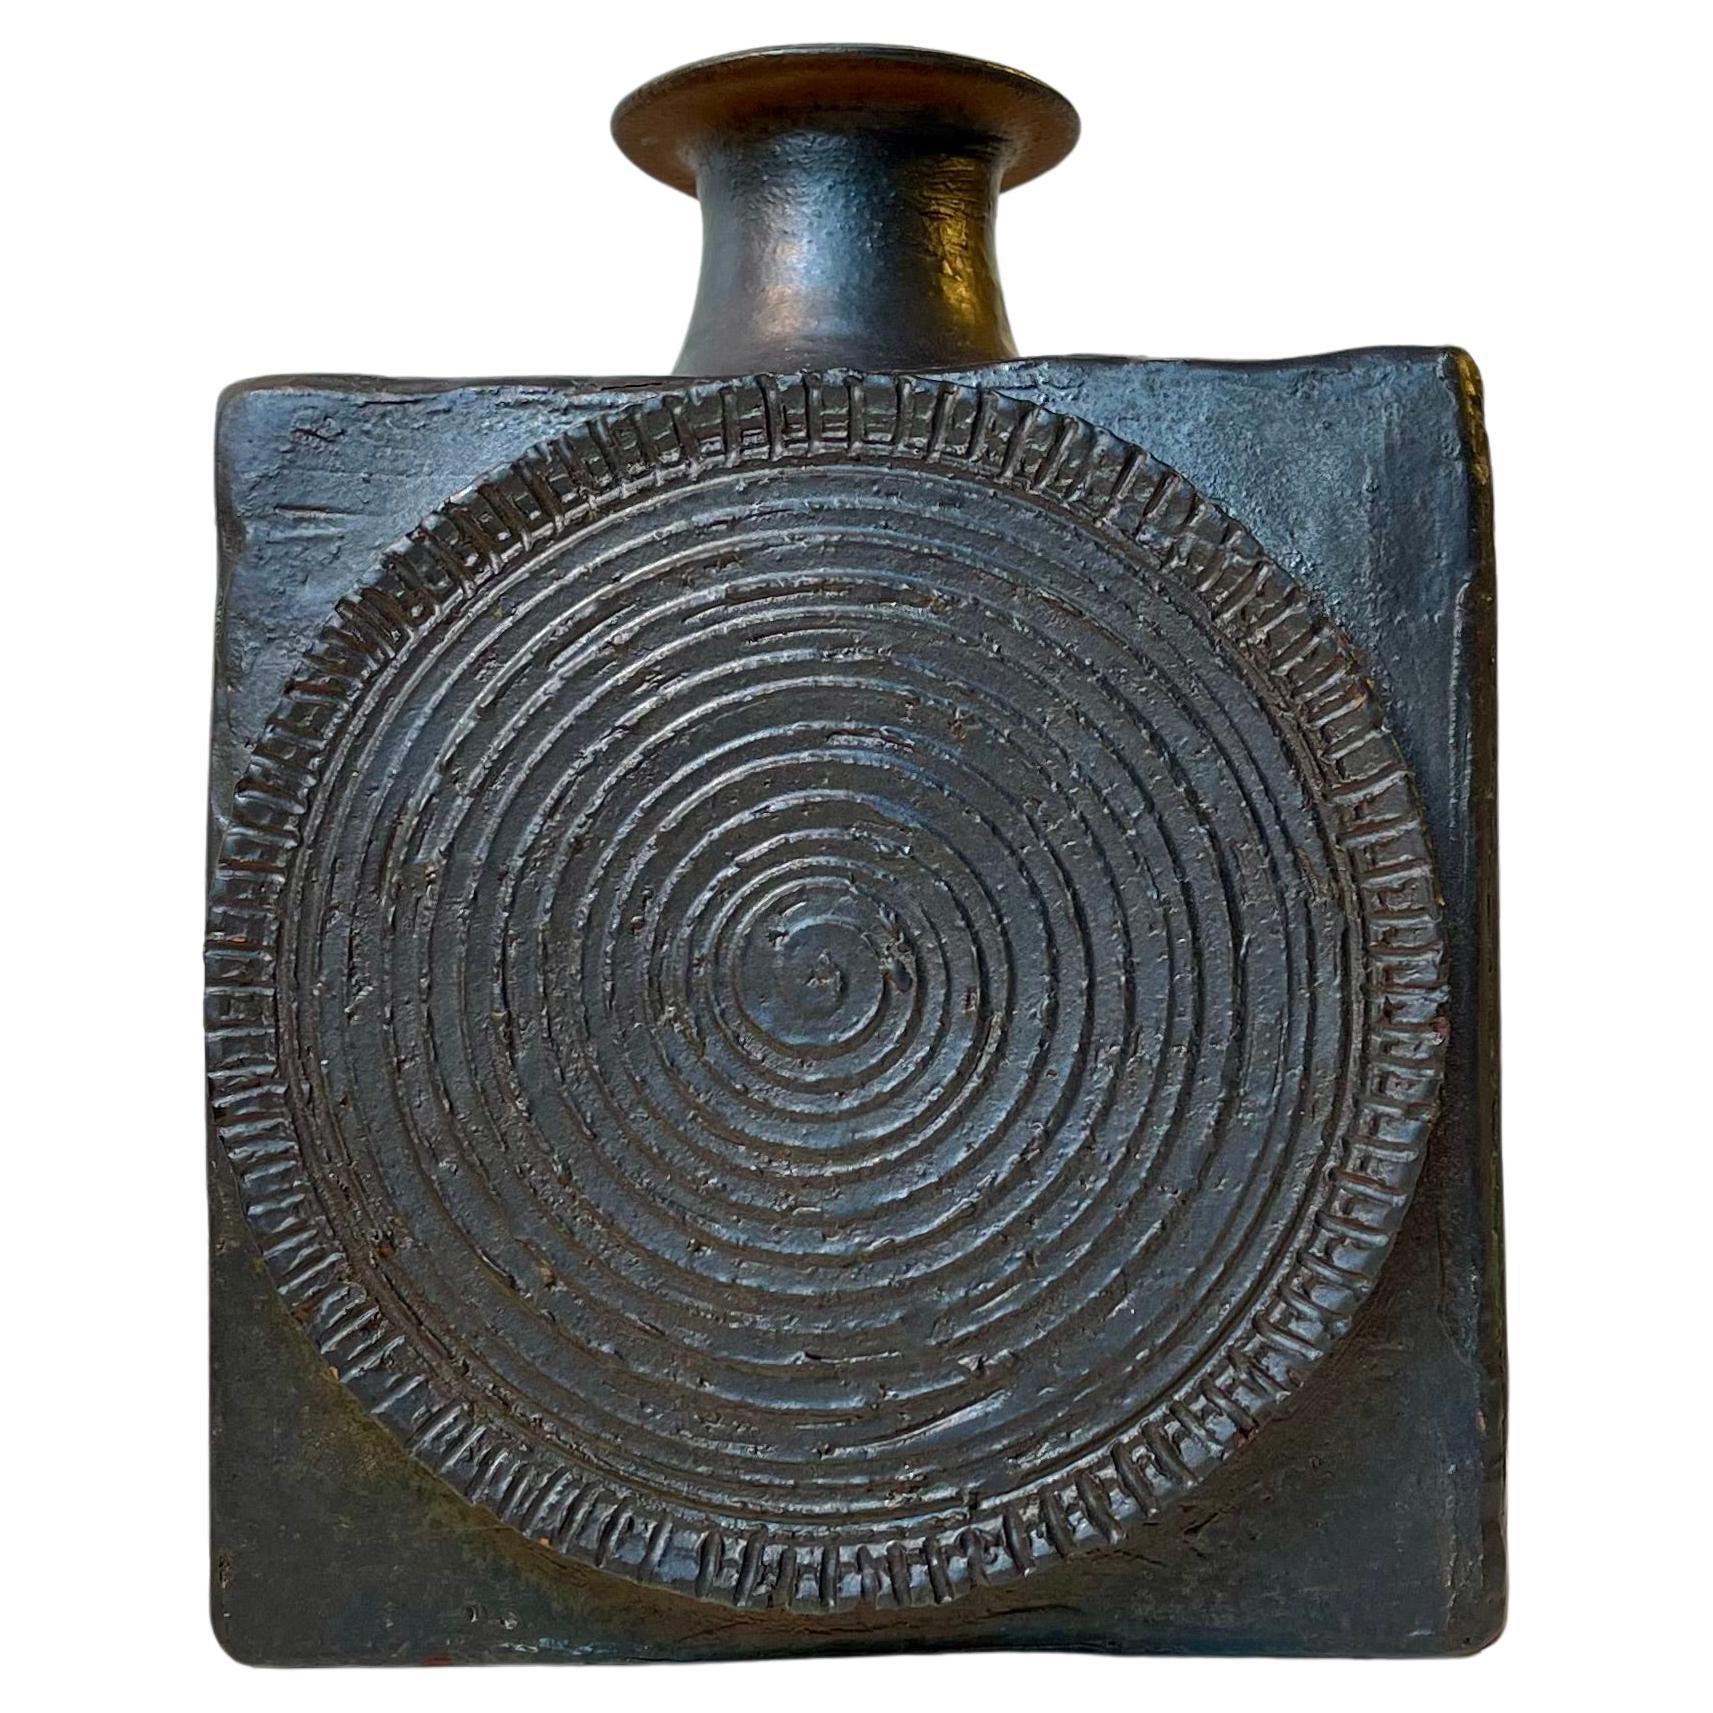 Special Scandinavian vase executed in glazed stoneware. It is square and features a spiraling shield ornament to its front. It has no markings but is Scandinavian studio made and it sure bears close resemblance to designs by Finn Lynggaard and